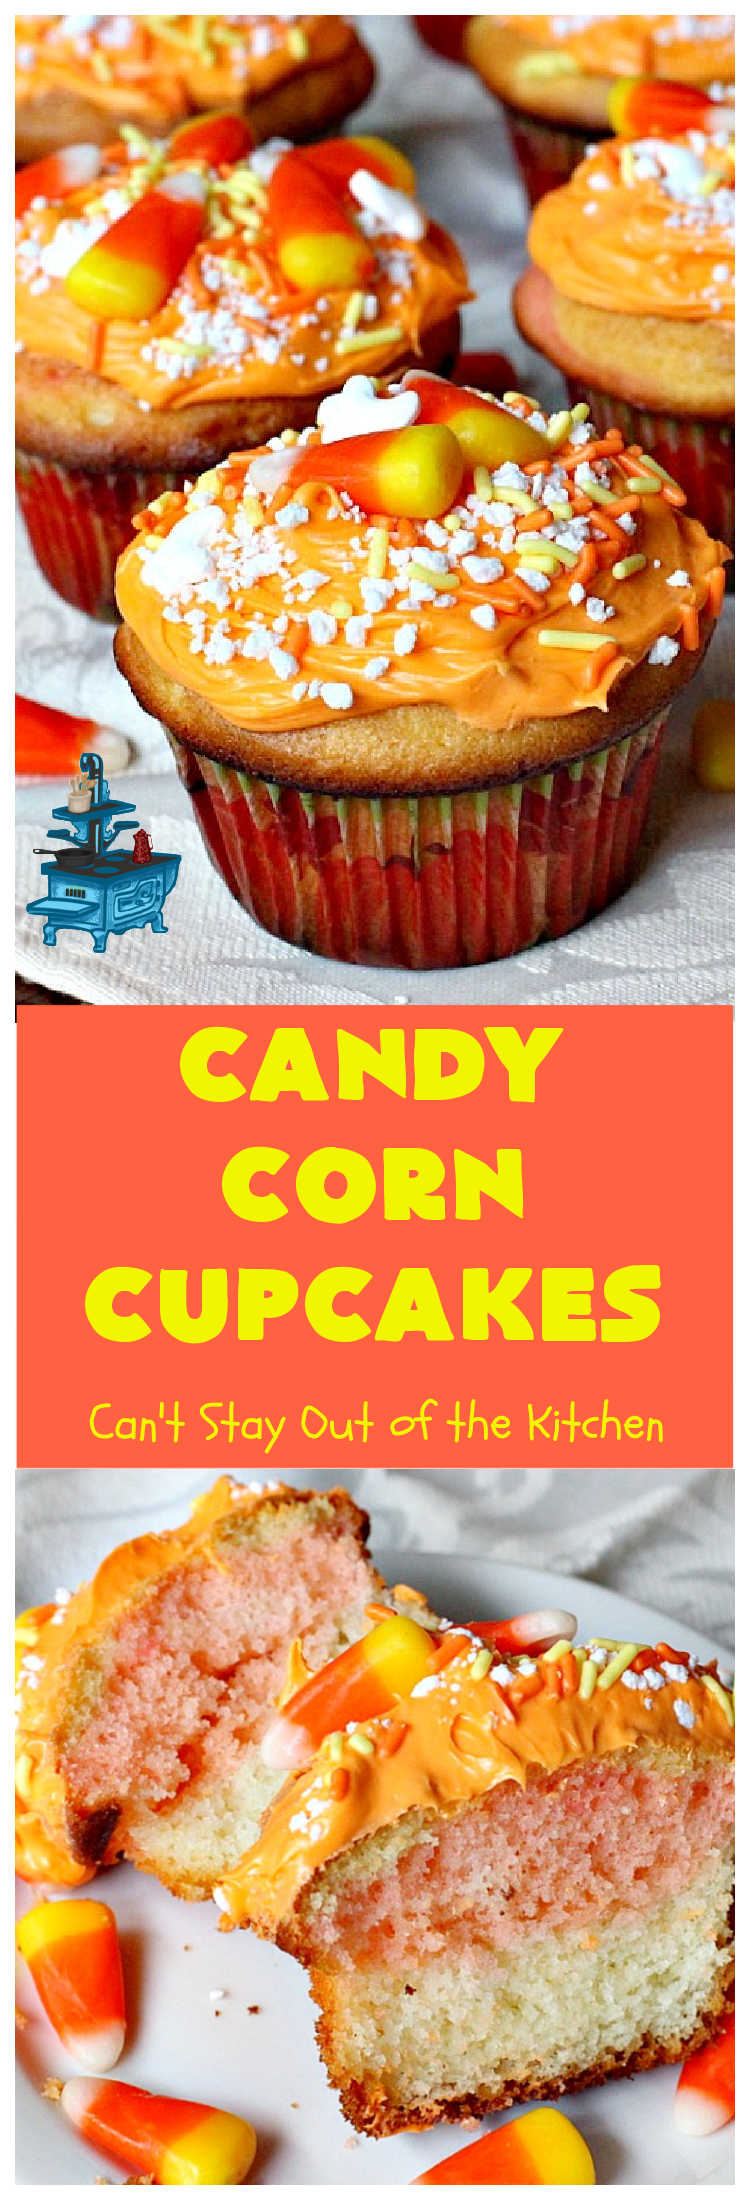 Candy Corn Cupcakes | Can't Stay Out of the Kitchen | these adorable #cupcakes are made with #CandyCorns and are a great way to use up leftover #Halloween candy! #dessert #HalloweenDessert #CandyCornCupcakes